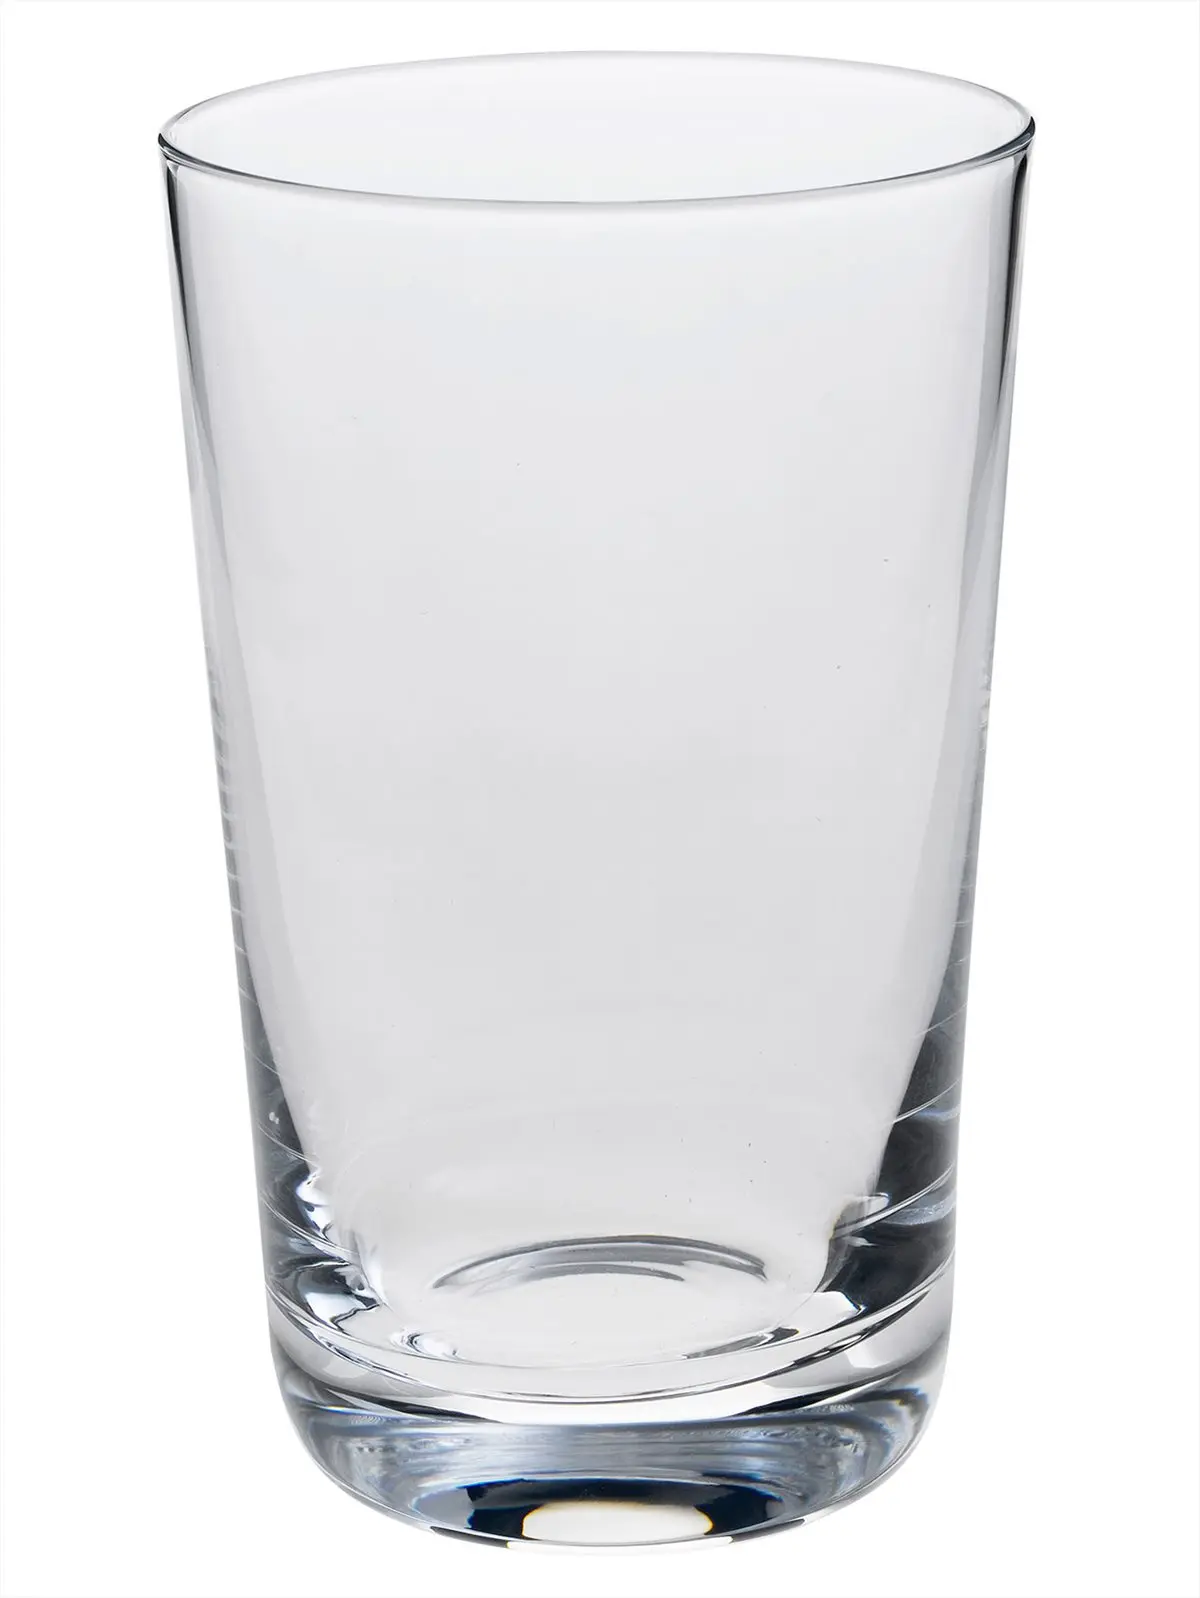 LaModaHome Pasabahce "Orleans" Water Glass and Long Drink Cups, Unique High Quality Drinking for Tumbler Kitchen